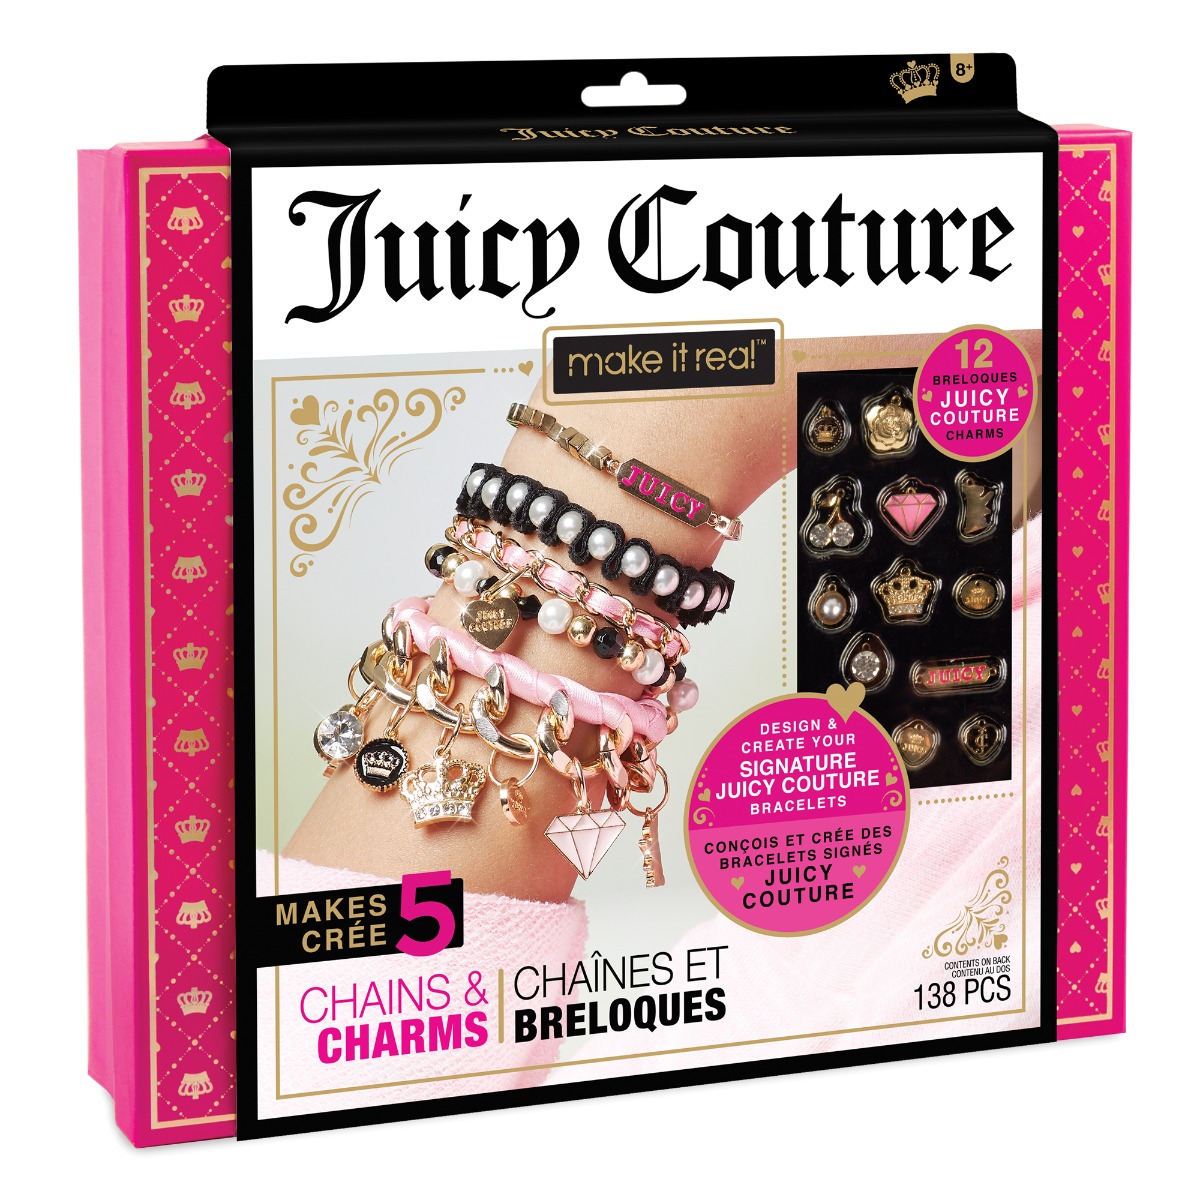 Set de bratari Juicy Couture Chains and Charms, Make It Real, 138 piese 1:38 imagine 2022 protejamcopilaria.ro